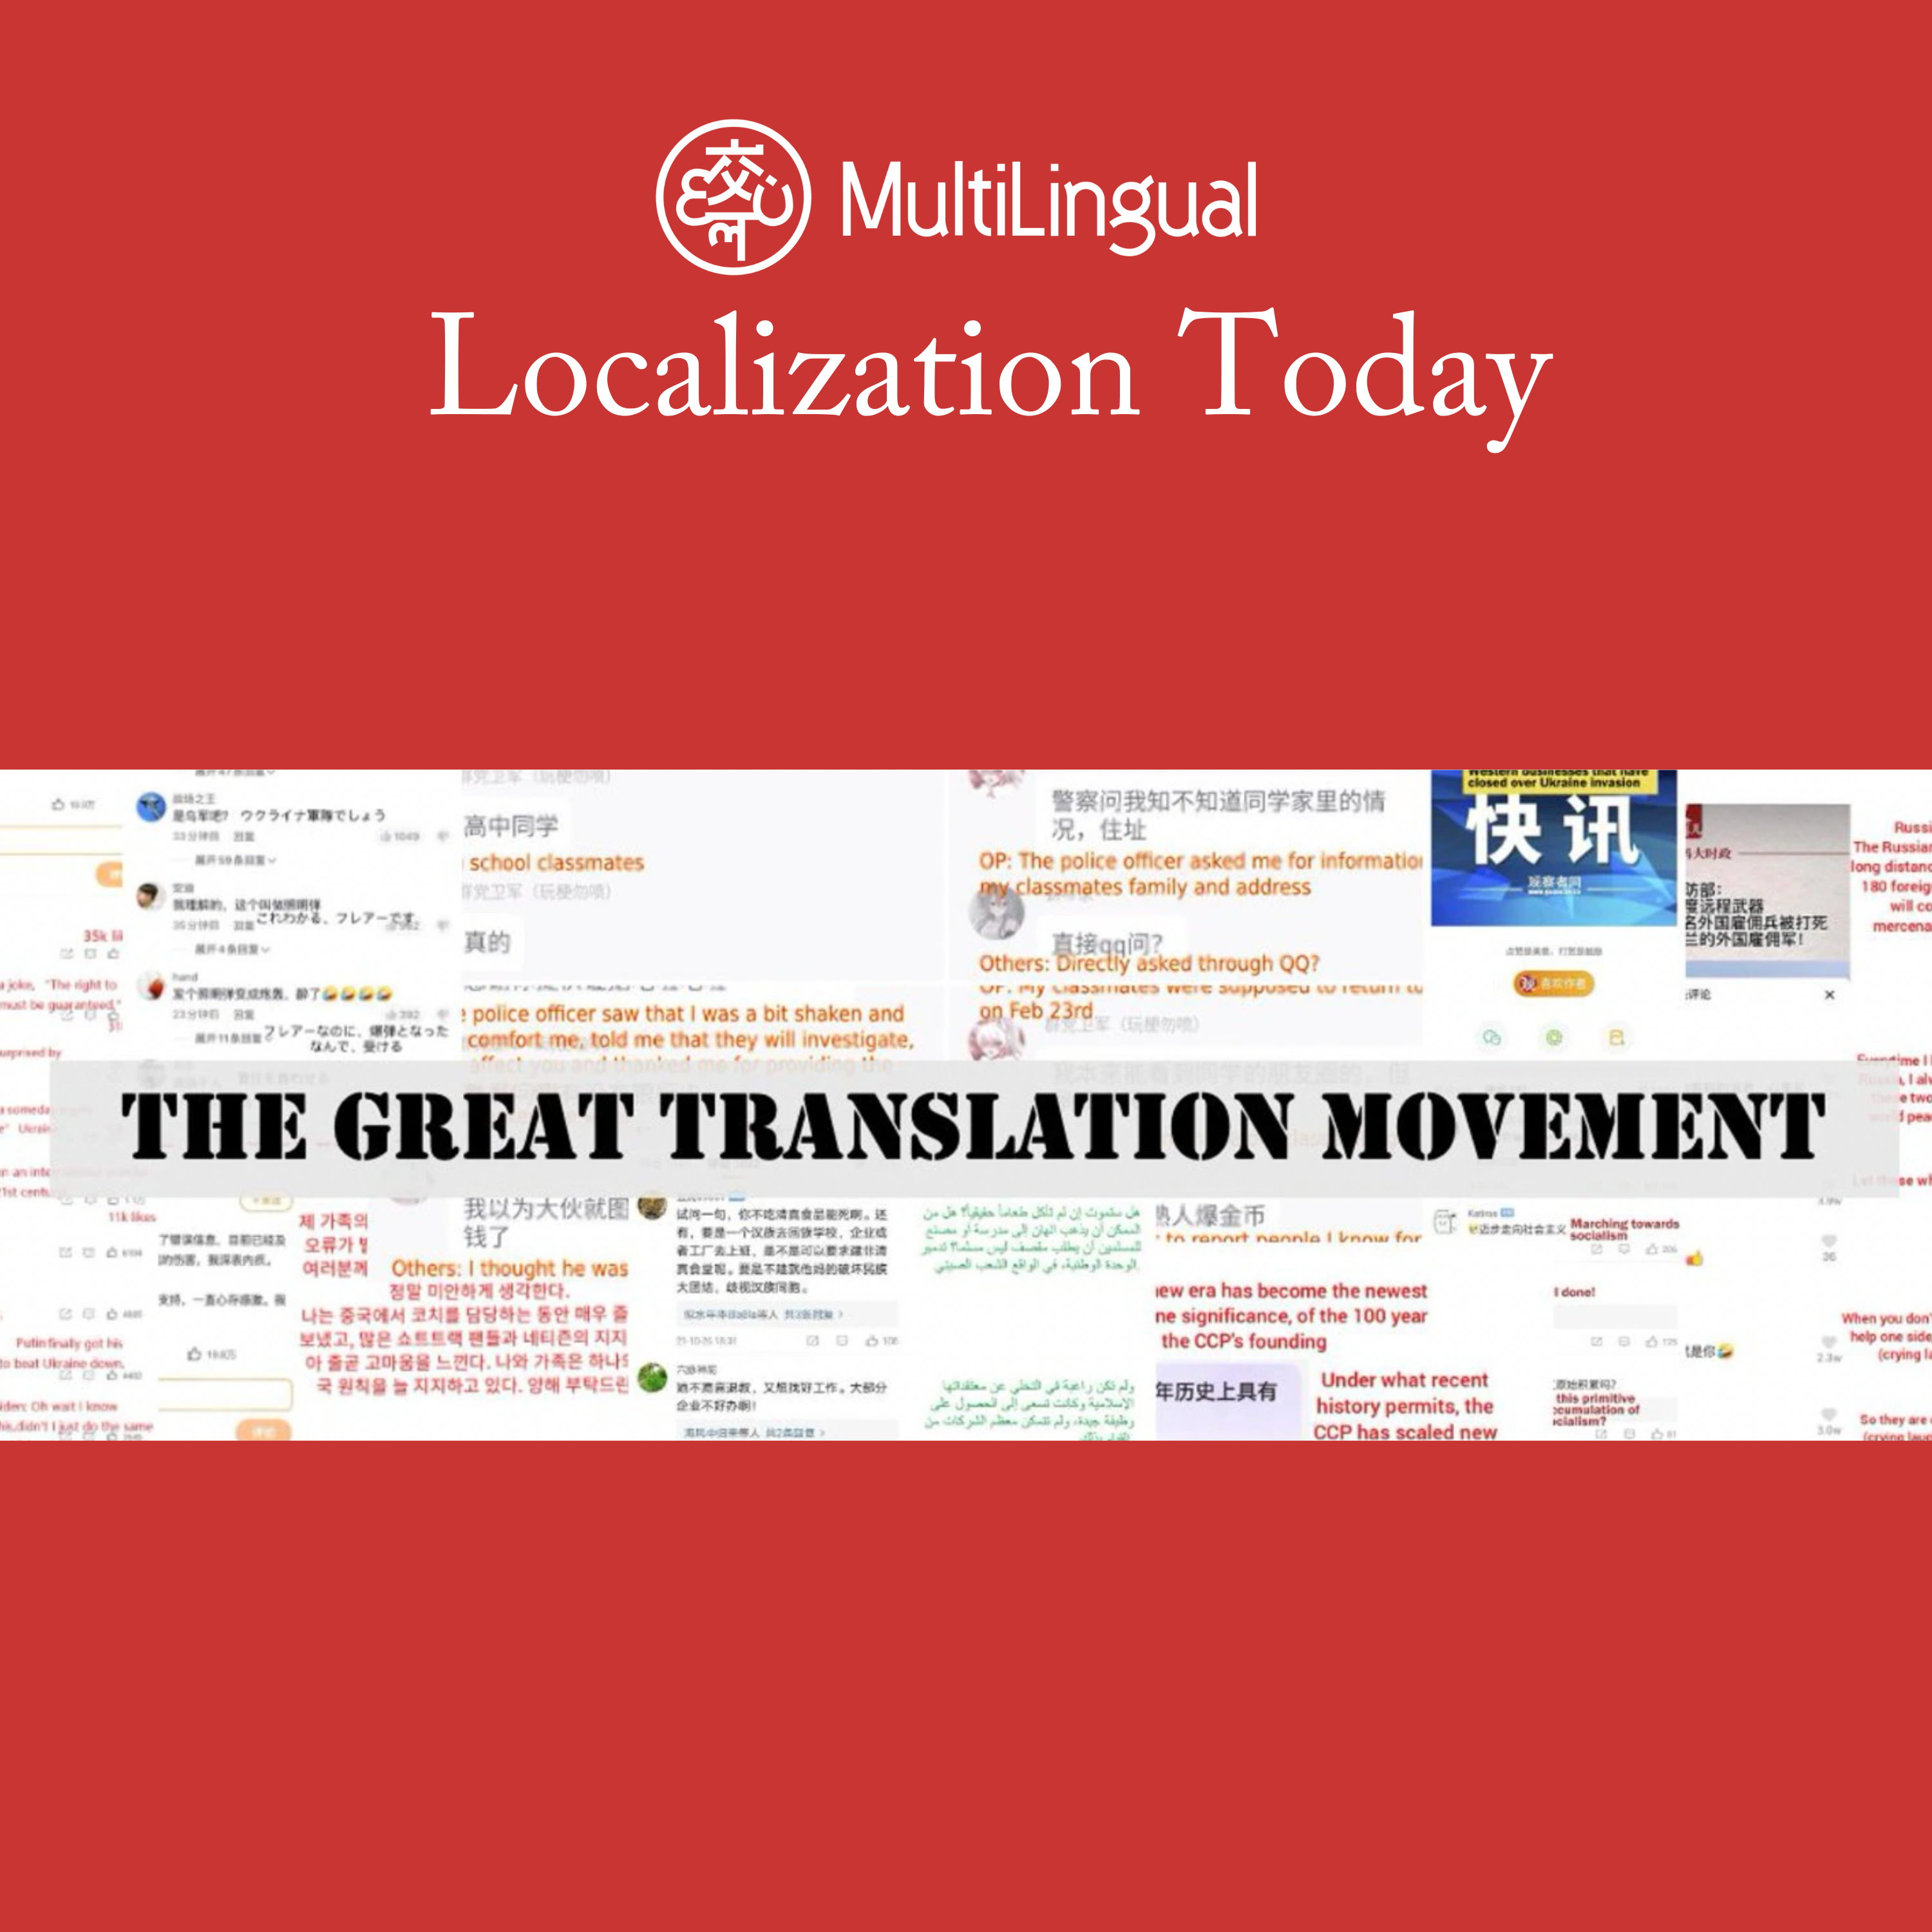 The Great Translation Movement translates Chinese social media, public opinion